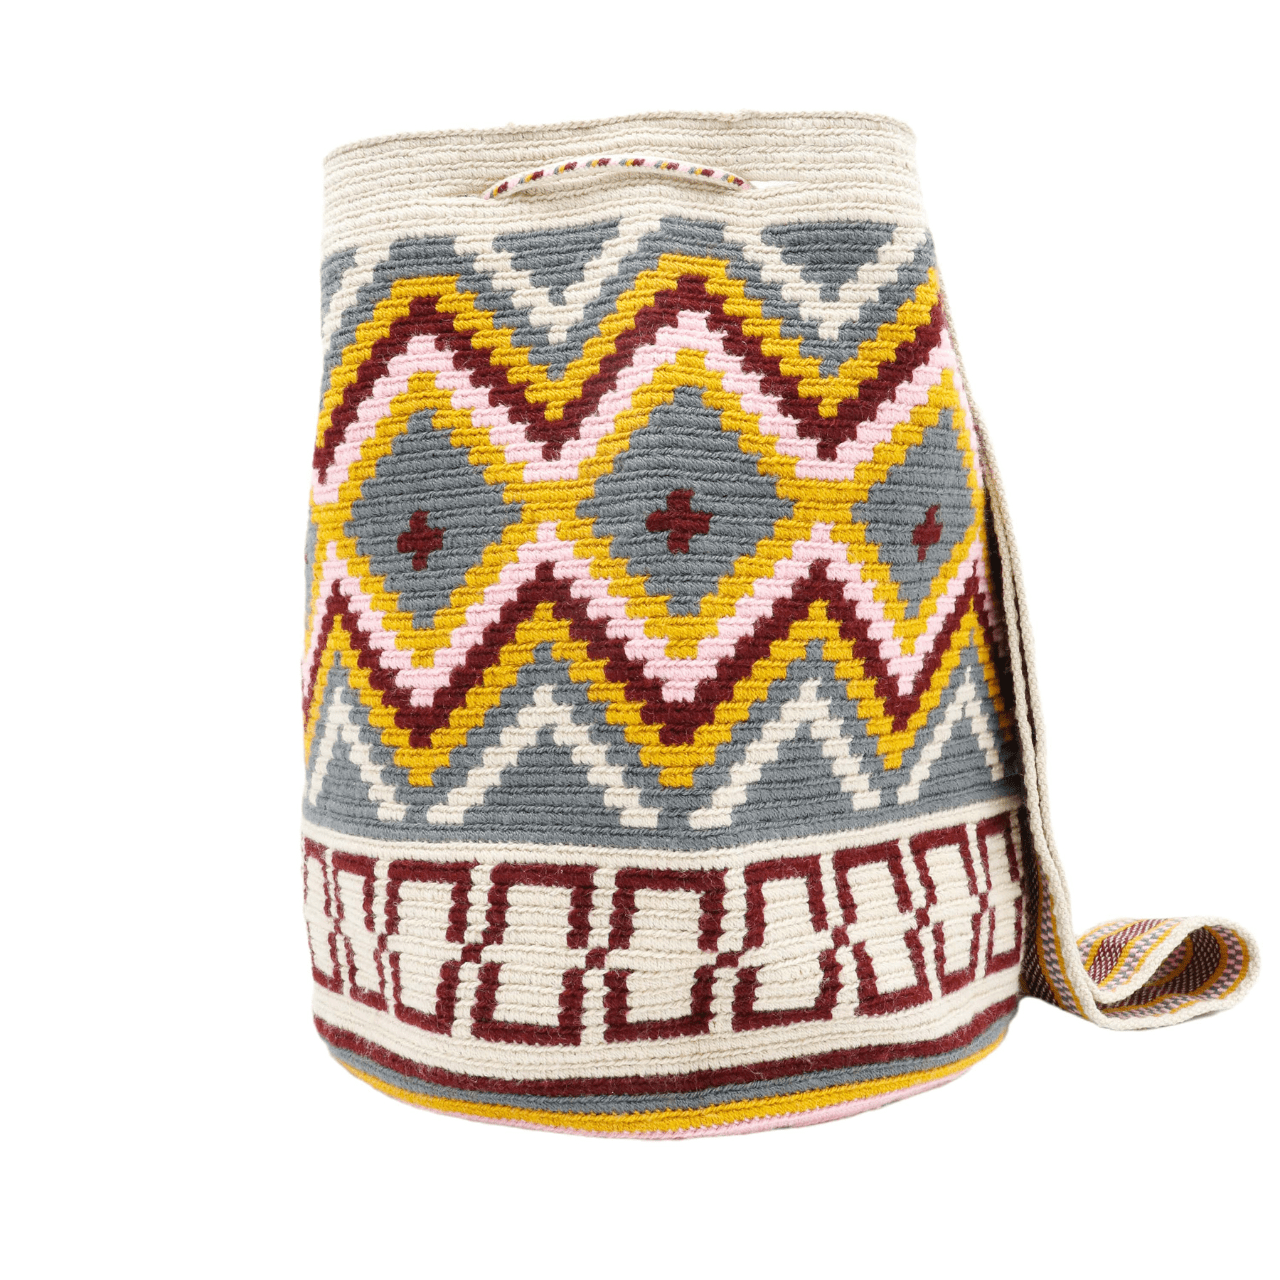 Handcrafted Wayuu bag featuring a vibrant mix of colors, showcasing the intricate weaving techniques of the Wayuu artisans